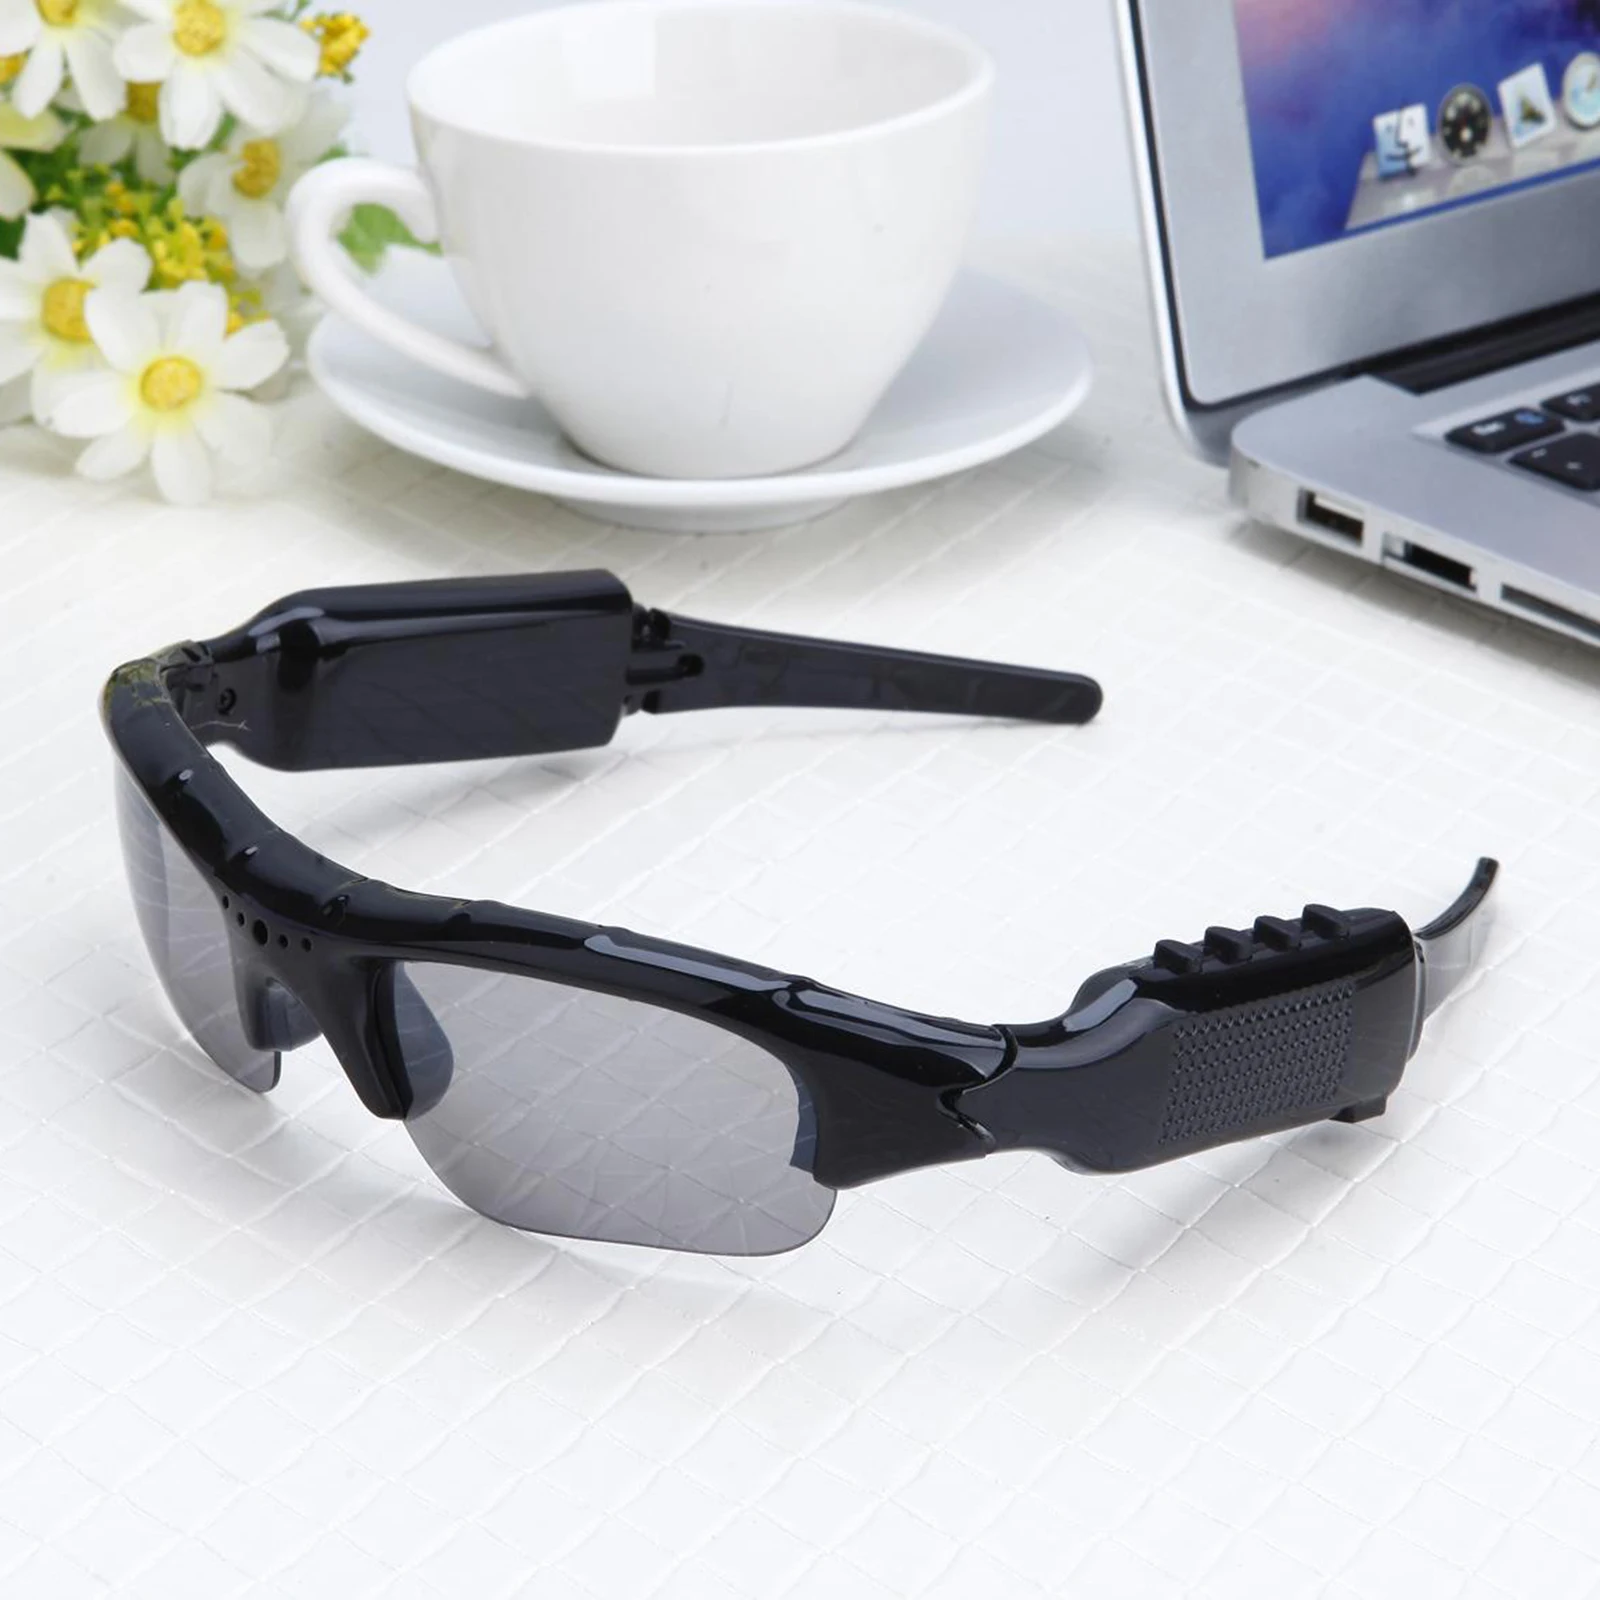 Sunglasses Headset Headphone Bluetooth Wireless Music Sunglasses Headsets Compatible for Smart Phones PC Tablets